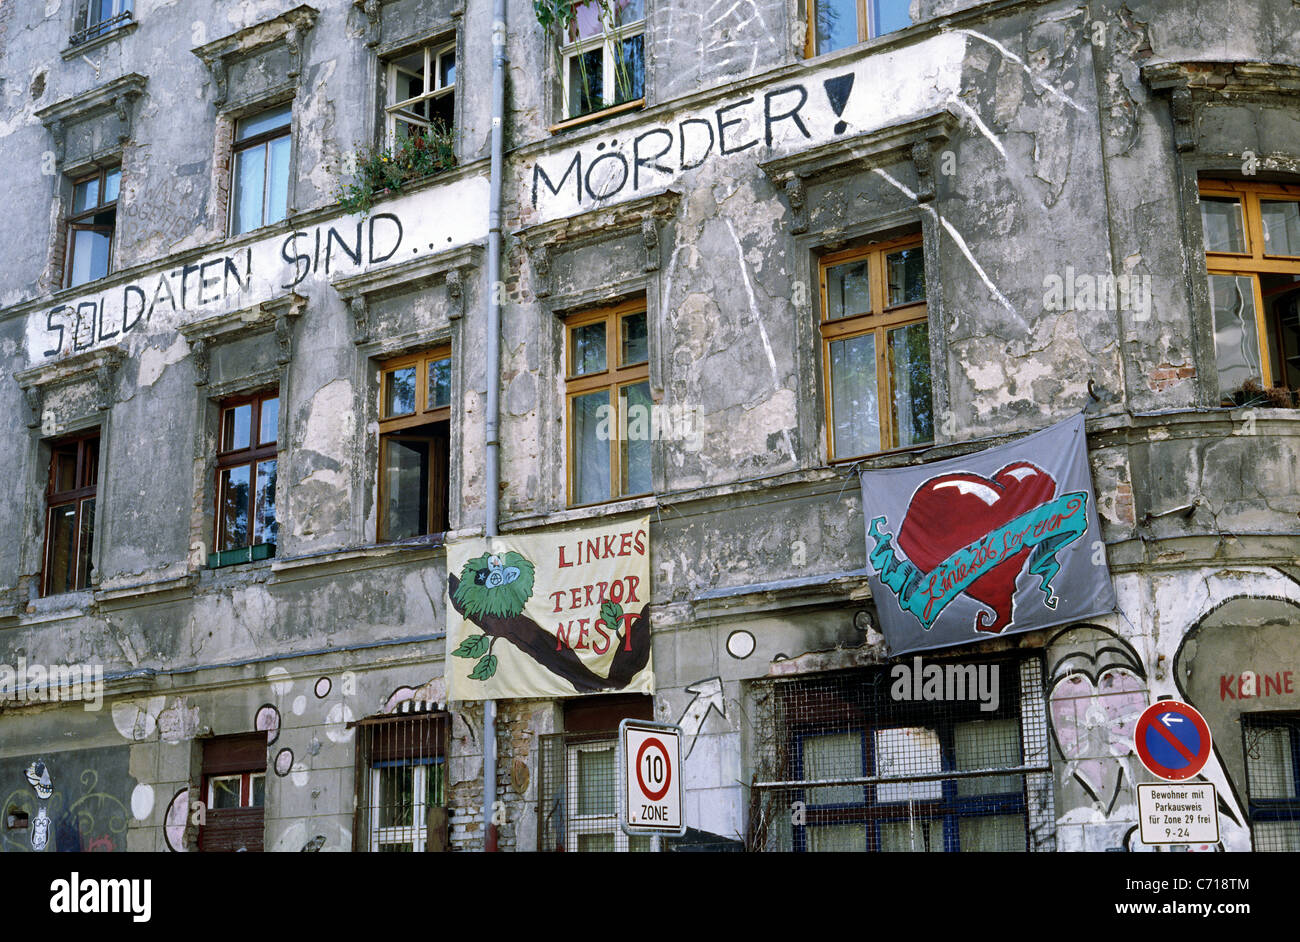 'Soldiers are murderers'. One of the few remaining squatted apartment buildings in Mitte district of Berlin. Stock Photo